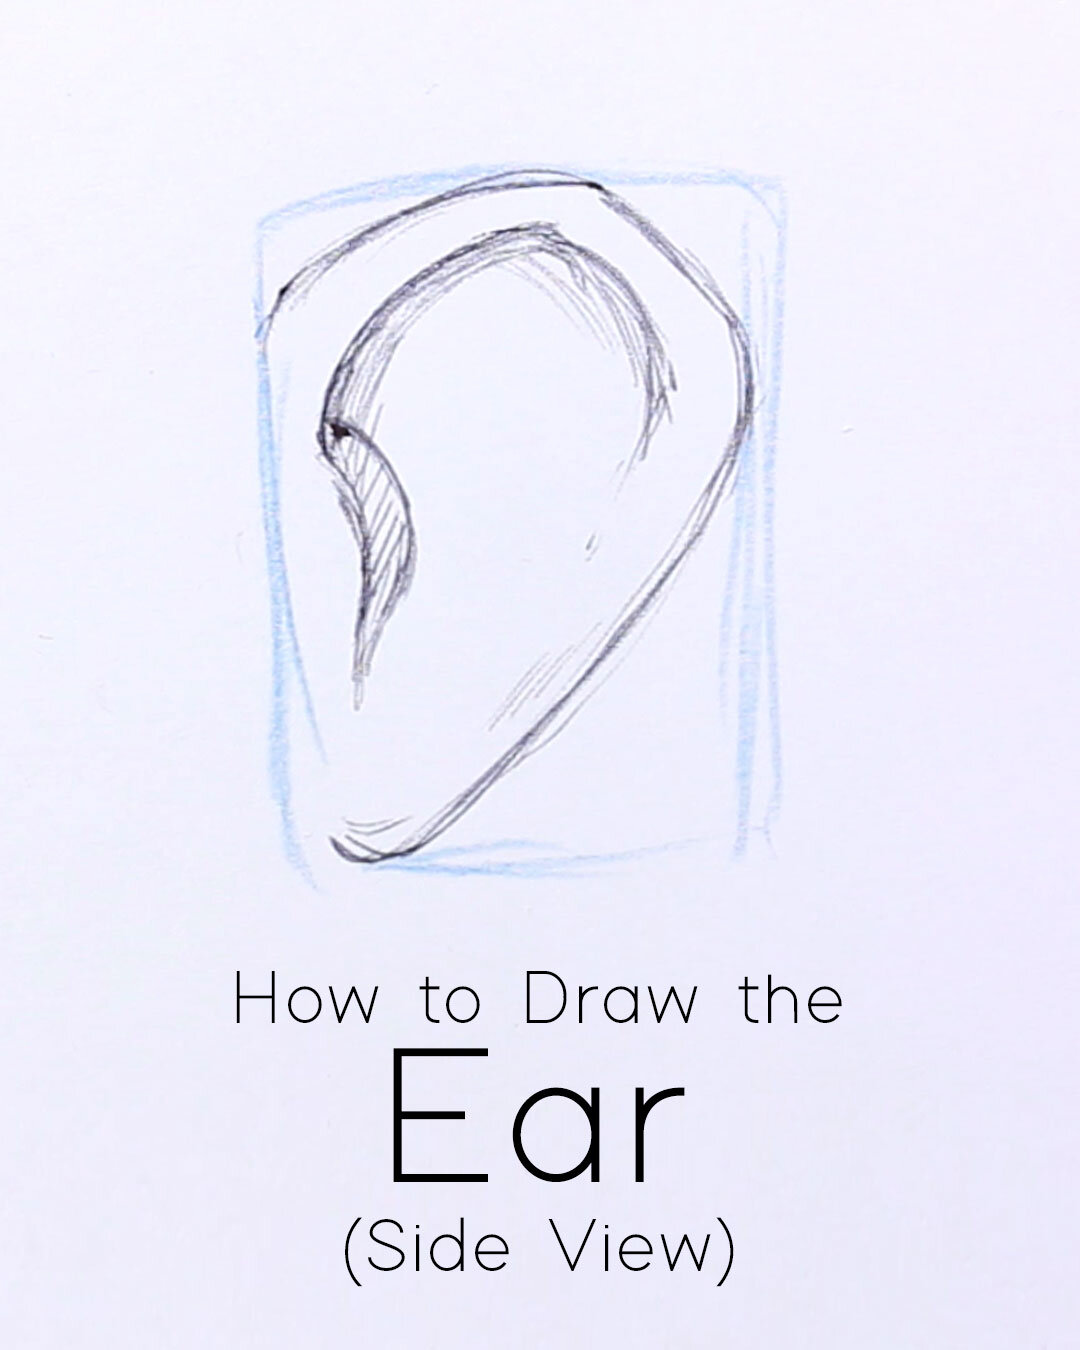 How to Draw an Ear from the Side